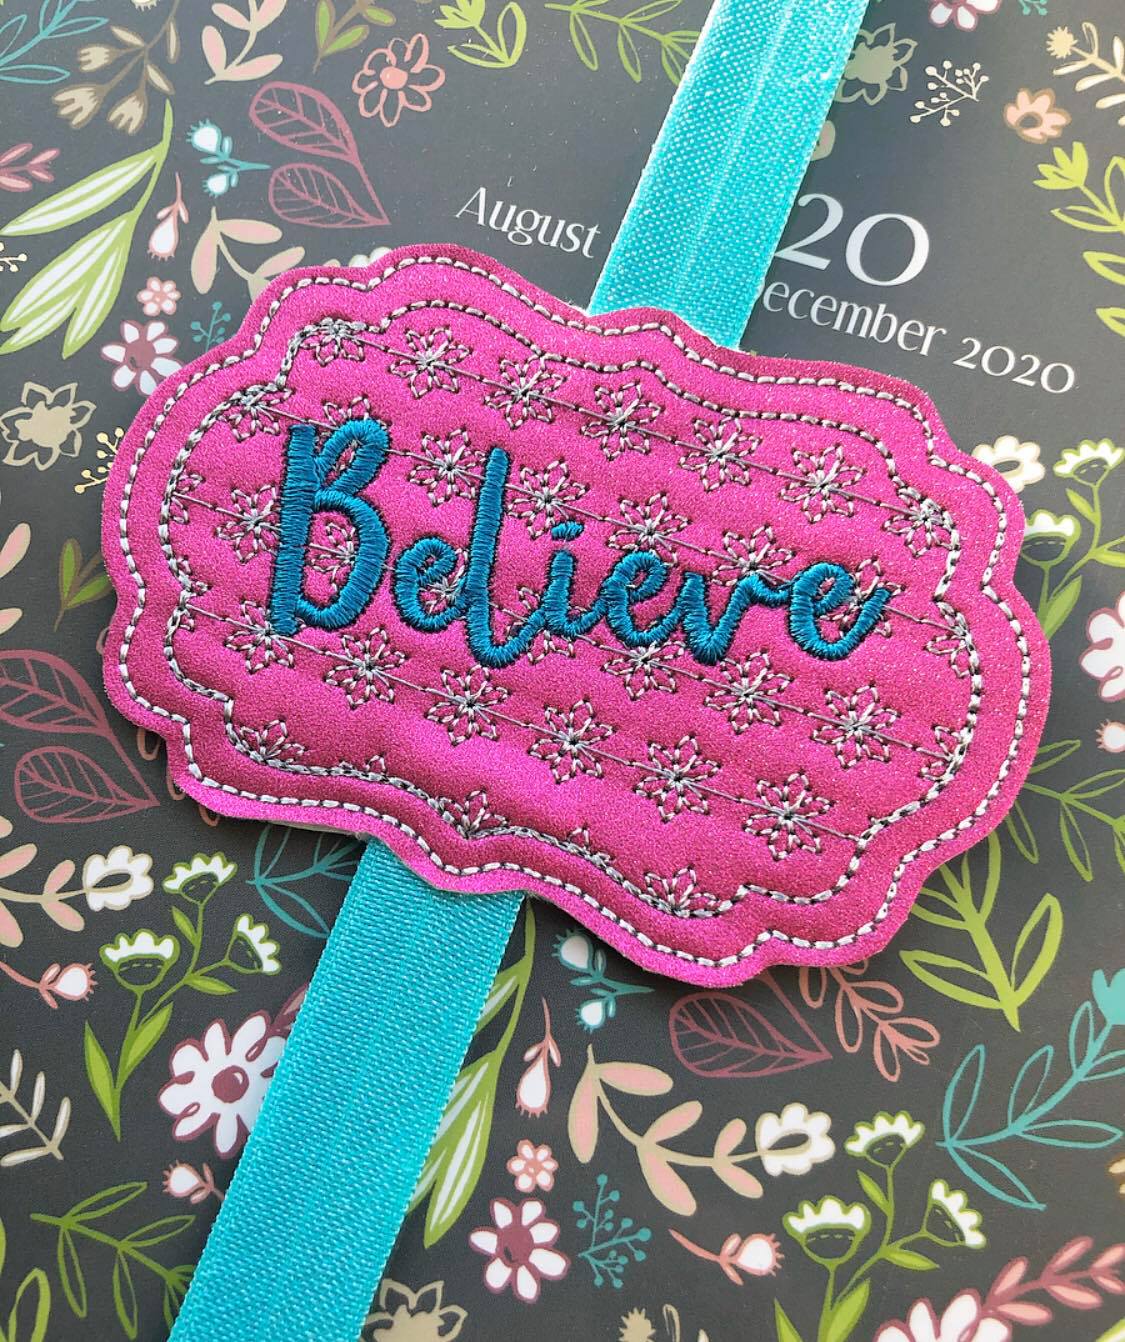 Believe Book Band - Digital Embroidery Design